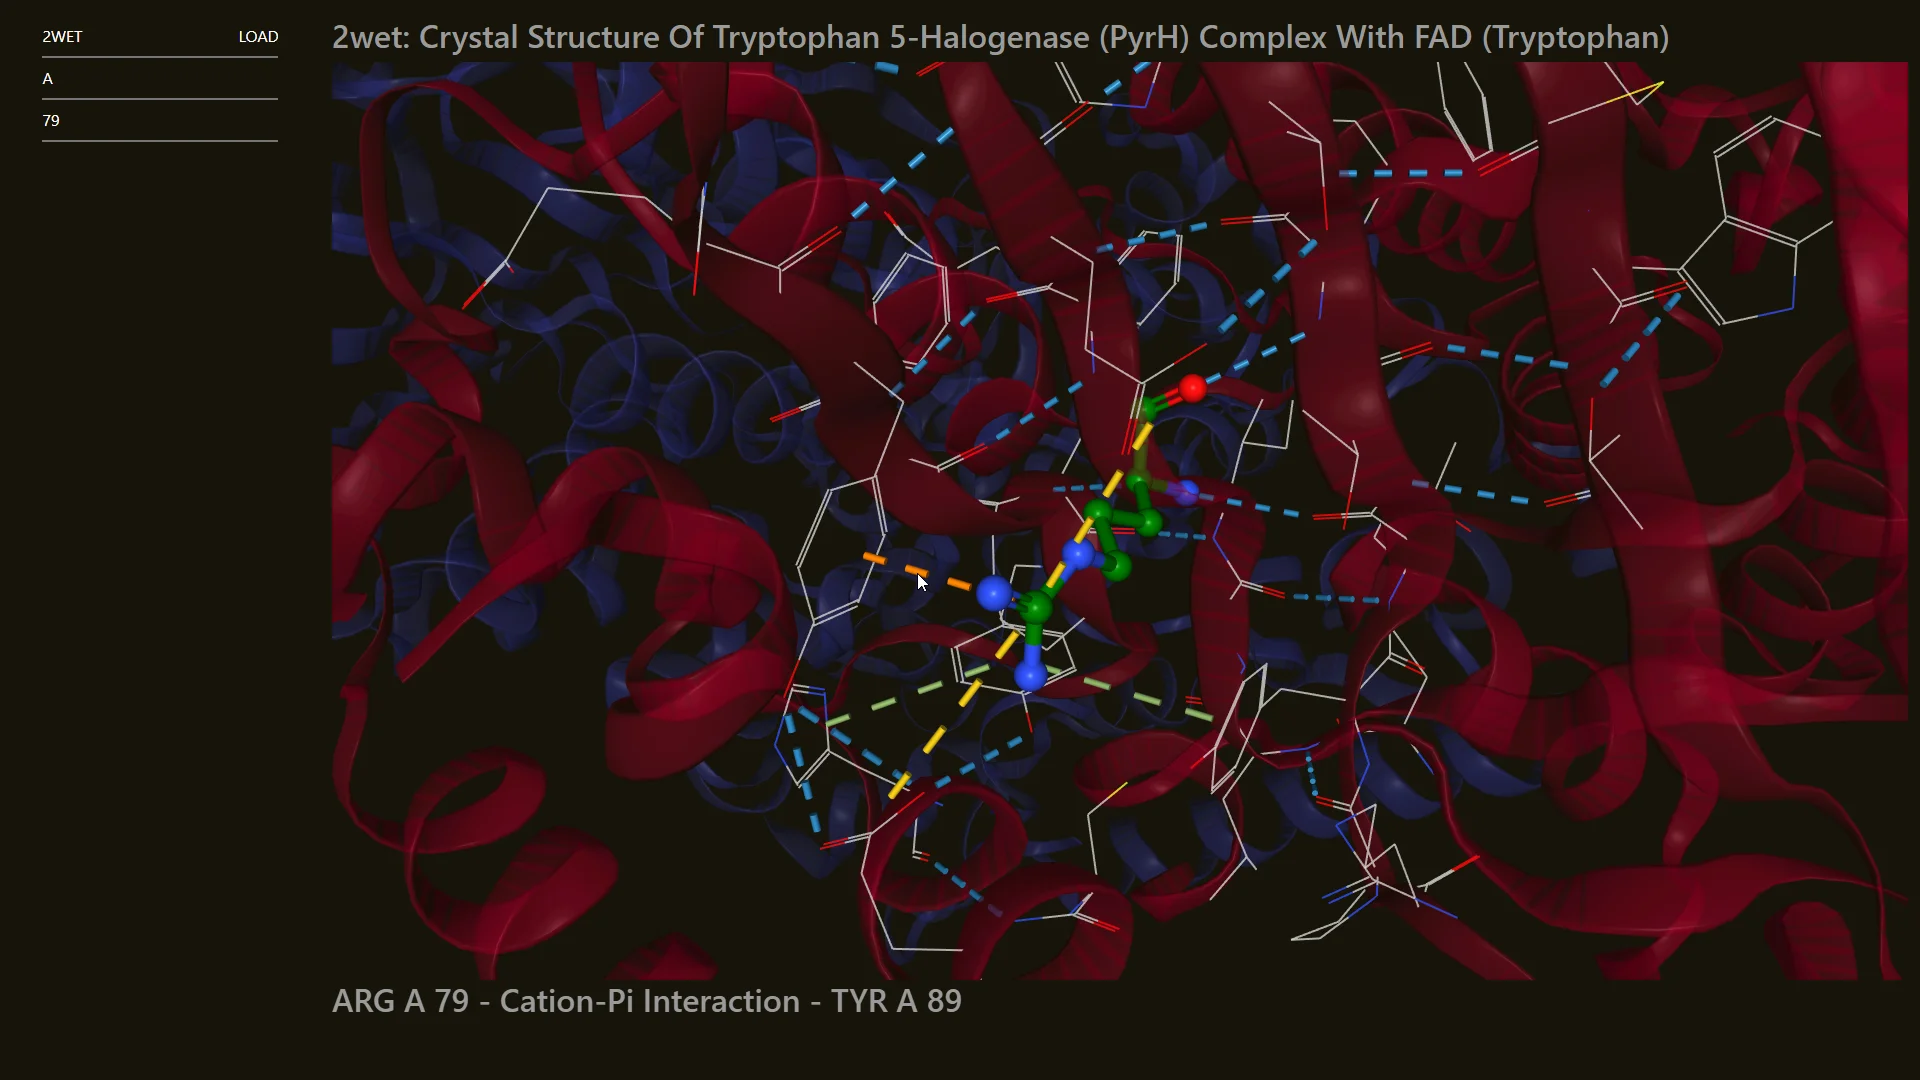 A close up view of a protein crystal structure residue residue interactions